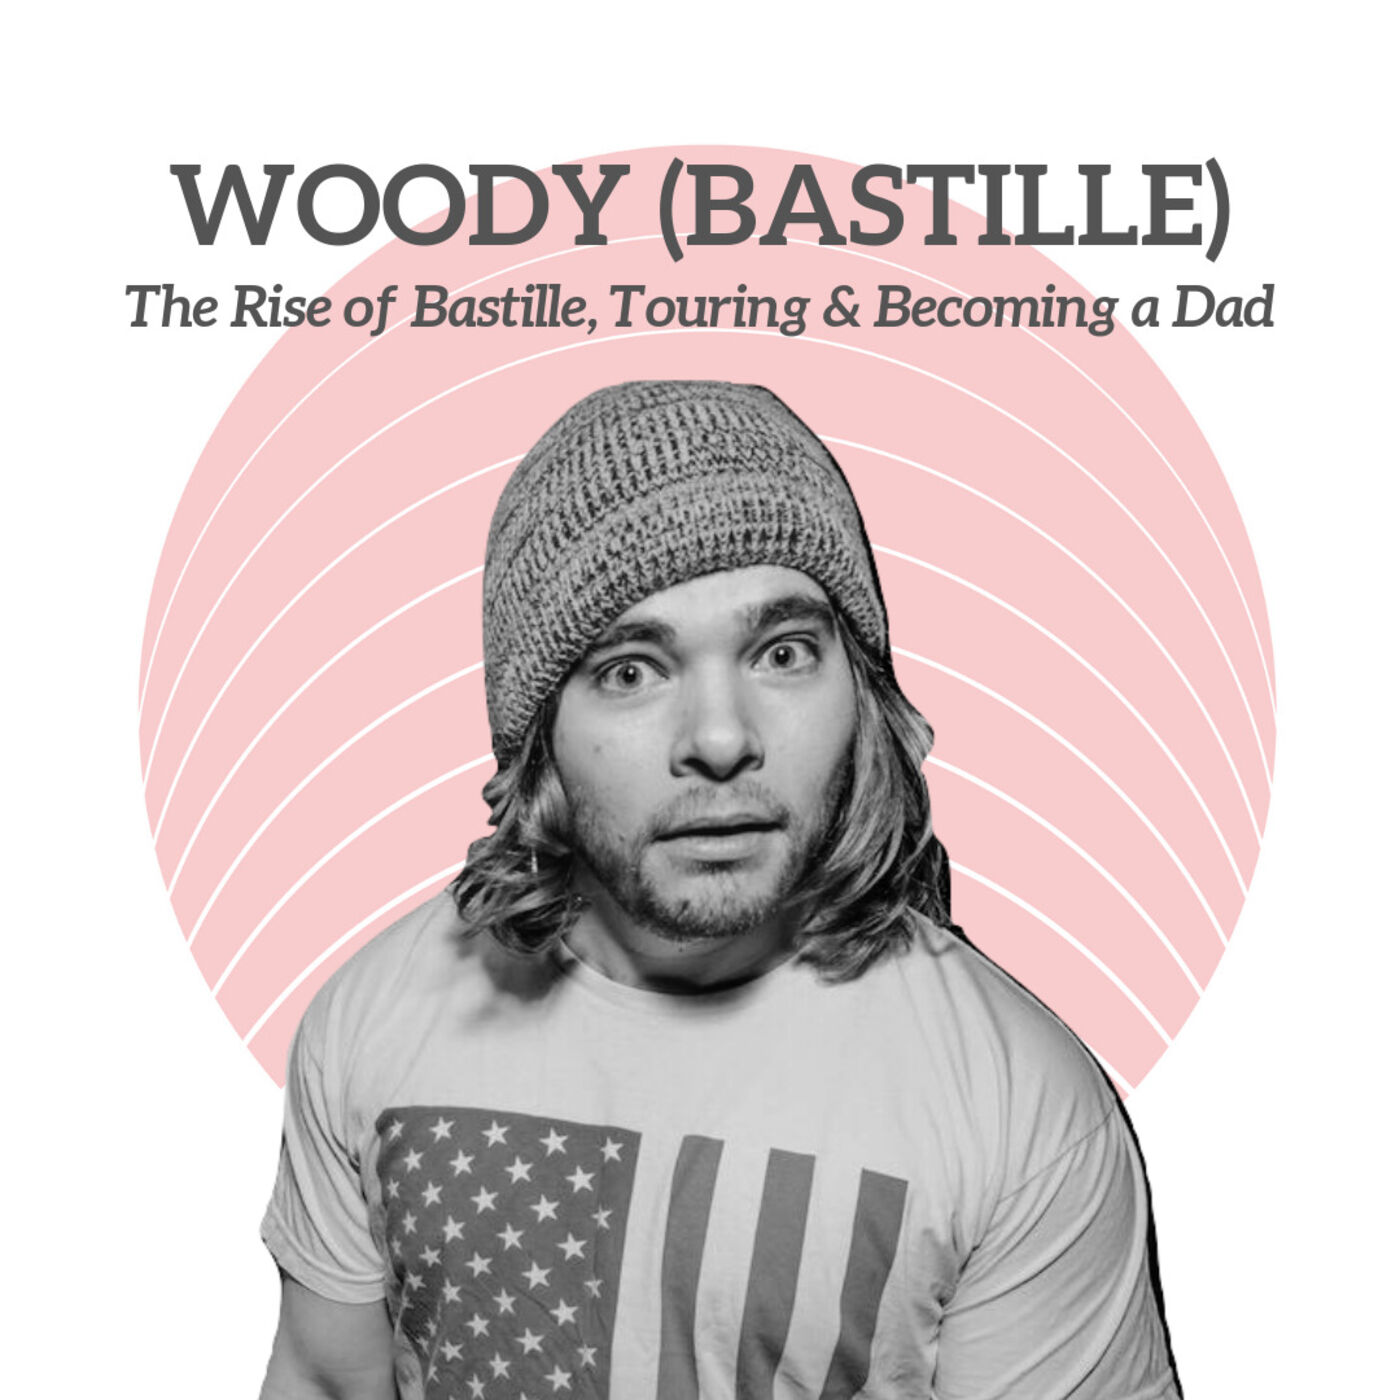 Woody (Bastille) - The Rise of Bastille, Touring & Becoming a Dad